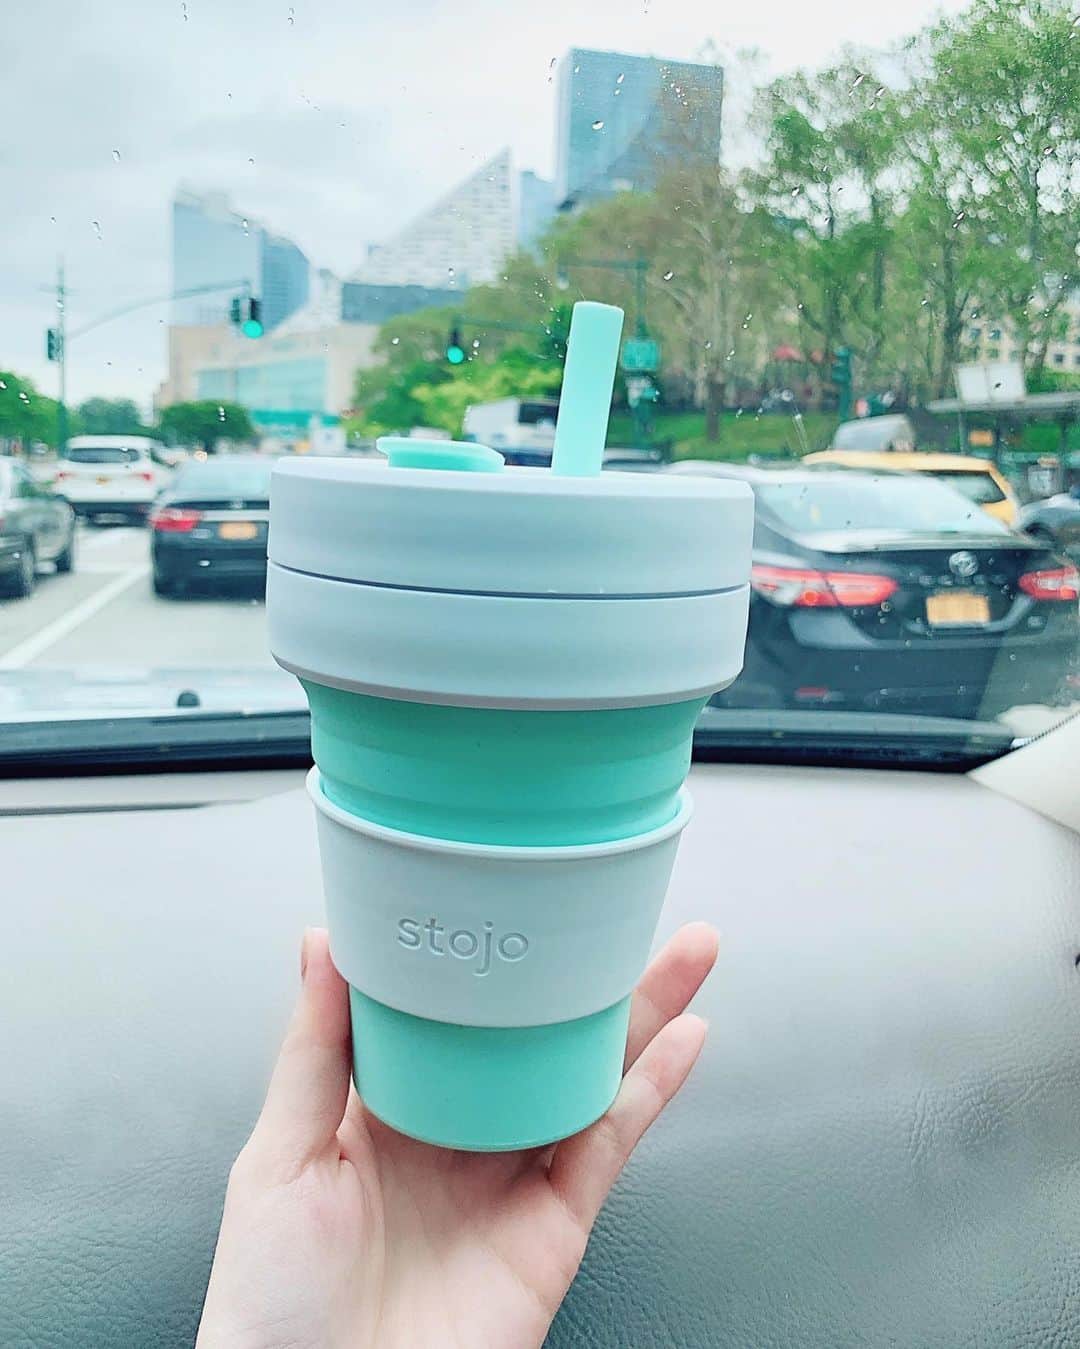 メロディー・モリタさんのインスタグラム写真 - (メロディー・モリタInstagram)「Be a part of the solution, NOT the pollution.💪 I've been staying hydrated by keeping my fave beverage in a collapsible, reusable, and leak-proof cup. It's also made from food grade, recyclable materials that comes with a removable straw. It indeed is difficult to completely end the use of plastic in a short period of time, but what we can do is to stop waiting for others to do it and make your own move. Let’s take it one step at a time to get closer to ending disposable culture.✨ ___________________________  プラスチックは軽くて丈夫で耐水性もあって便利な素材ですが、プラスチック製のレジ袋が完全に自然分解されるには1000年以上かかると言われています。このままプラスチック使用を続ければ、あと30年以内に海のプラスチックごみが海の魚の量を超えるかもしれないそうです。 全くプラスチックを使用しないというのは難しいかもしれませんが、私は出来るだけマイボトルやマイバックを持ち歩き、プラスチックの利用を減らしていけるように心がけています。 私が使っているこちらのカップは、リサイクルされた素材から作られた折りたたみ式のカップ＆ストローで、繰り返し使用することができます。 ほんの少しの個人の努力で世界全体でのプラスチック使用量は減らすことが出来ますので、国連で行われているSDGsの「健全で生産的な海洋の実現」に少しでもご協力いただけると嬉しいです✨ #NY #LOTD #SDGs #sustainableliving」6月12日 8時37分 - melodeemorita